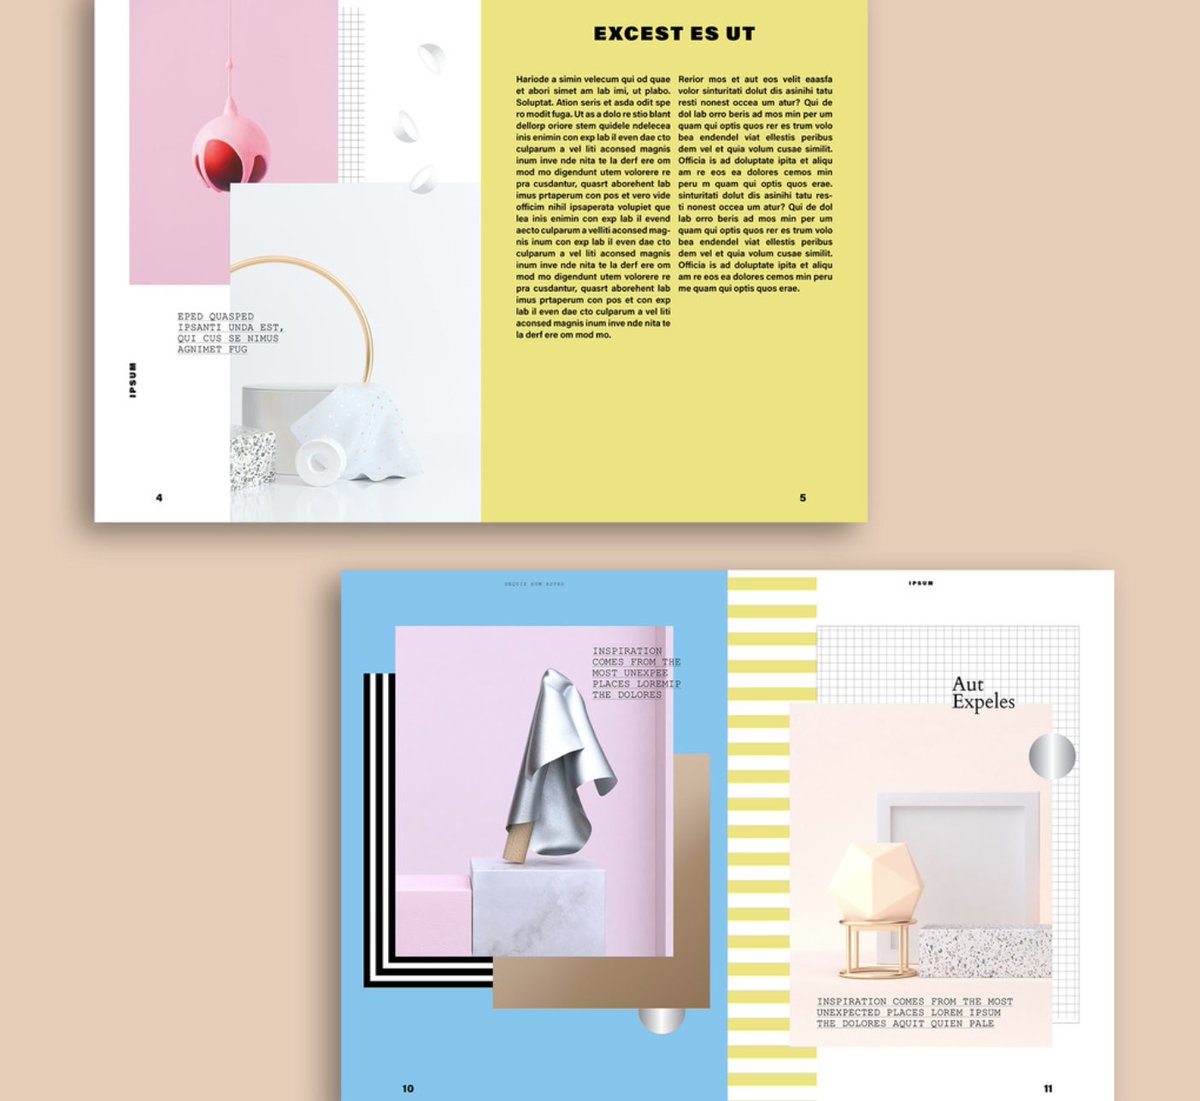 Adobe Indesign Get This Free Memphis Design Inspired Magazine Layout Template By Designarmy In Celebration Of Years Of Indesign T Co Fz4yaor26g Indesignth Adobestockxdesignarmy T Co Oku06b37d2